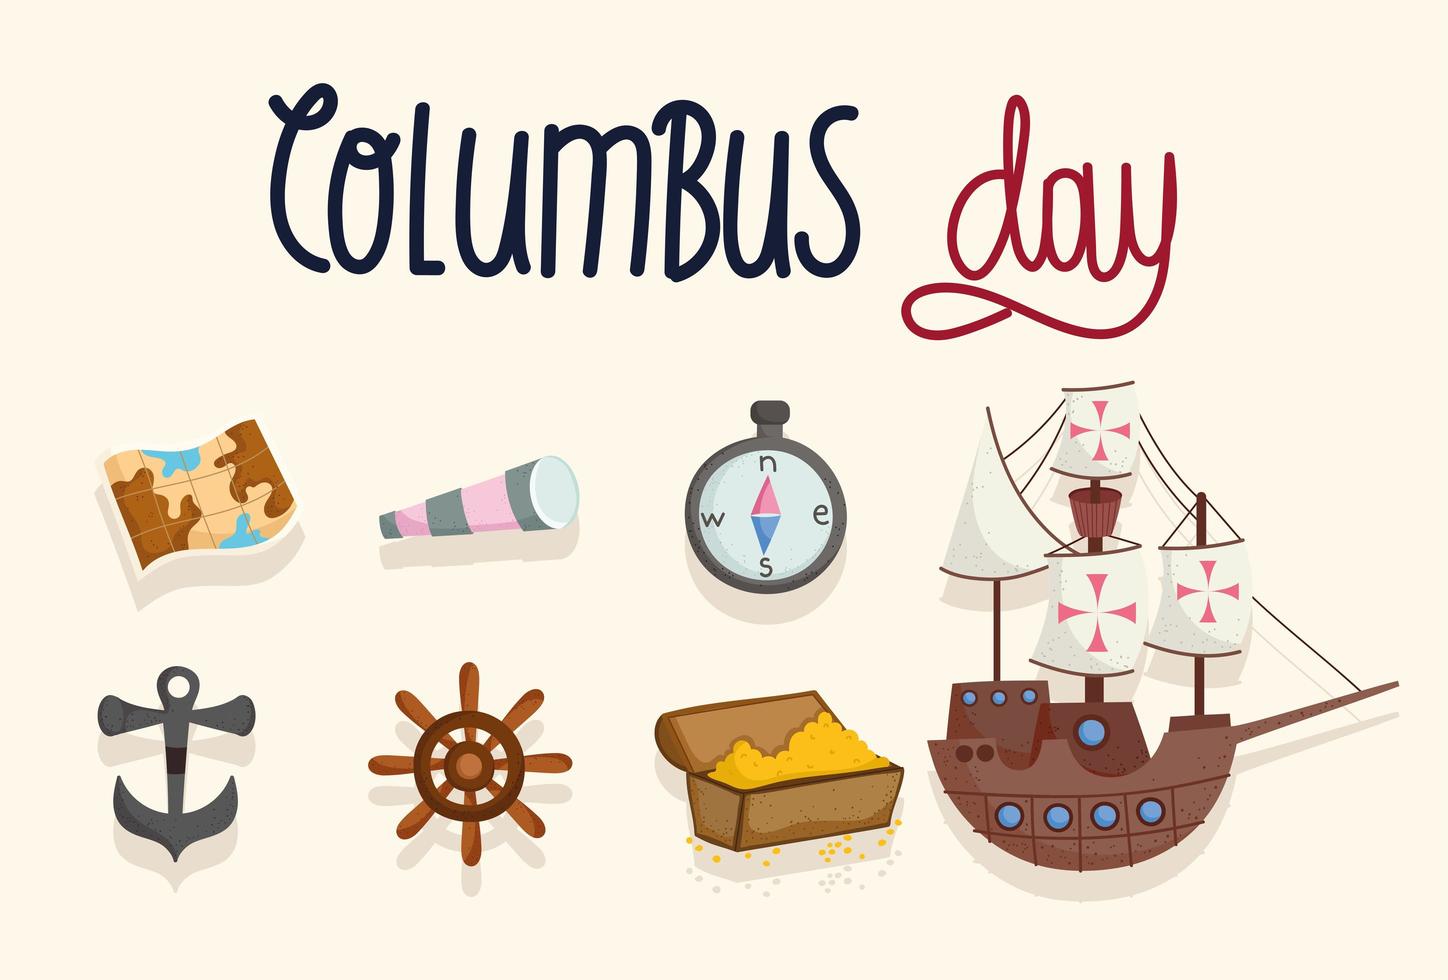 Columbus Day icons set vector